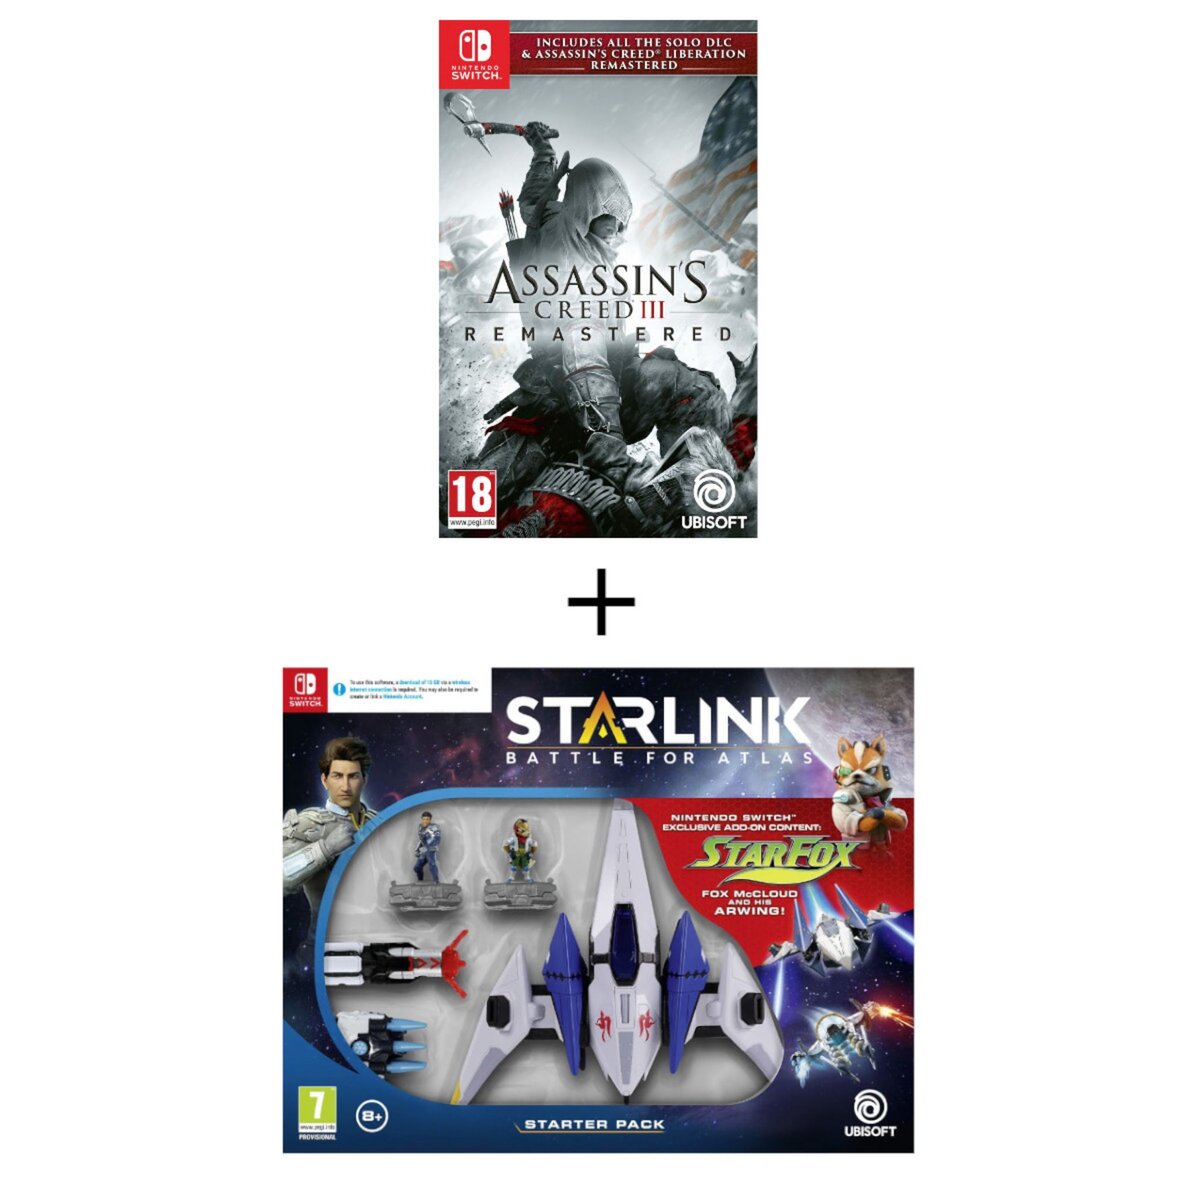 Assassin's Creed 3 + Assassin's Creed Liberation Remastered Nintendo Switch + Starlink Nintendo Switch